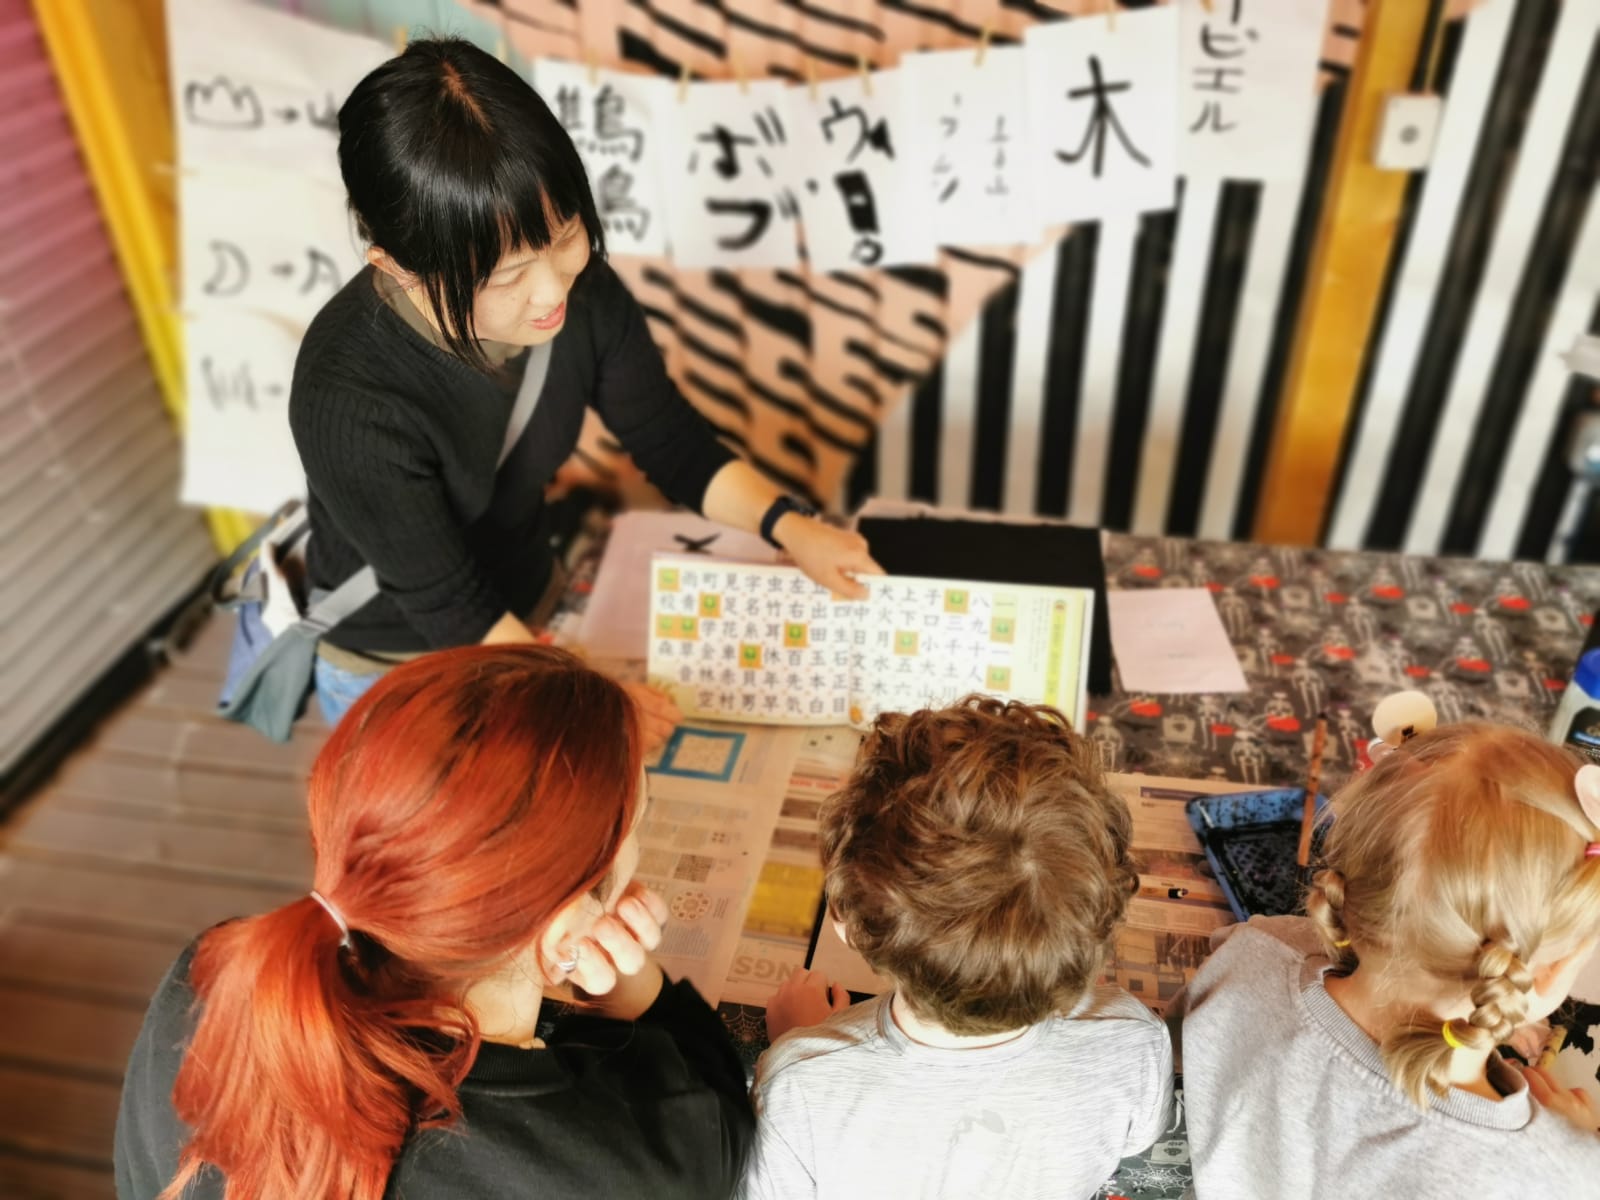 Woman demonstrates Japanese calligraphy to a mum and her 2 young people, She's pointing at a book, and Ink drawings of previous people's calligraphy hang up behind her